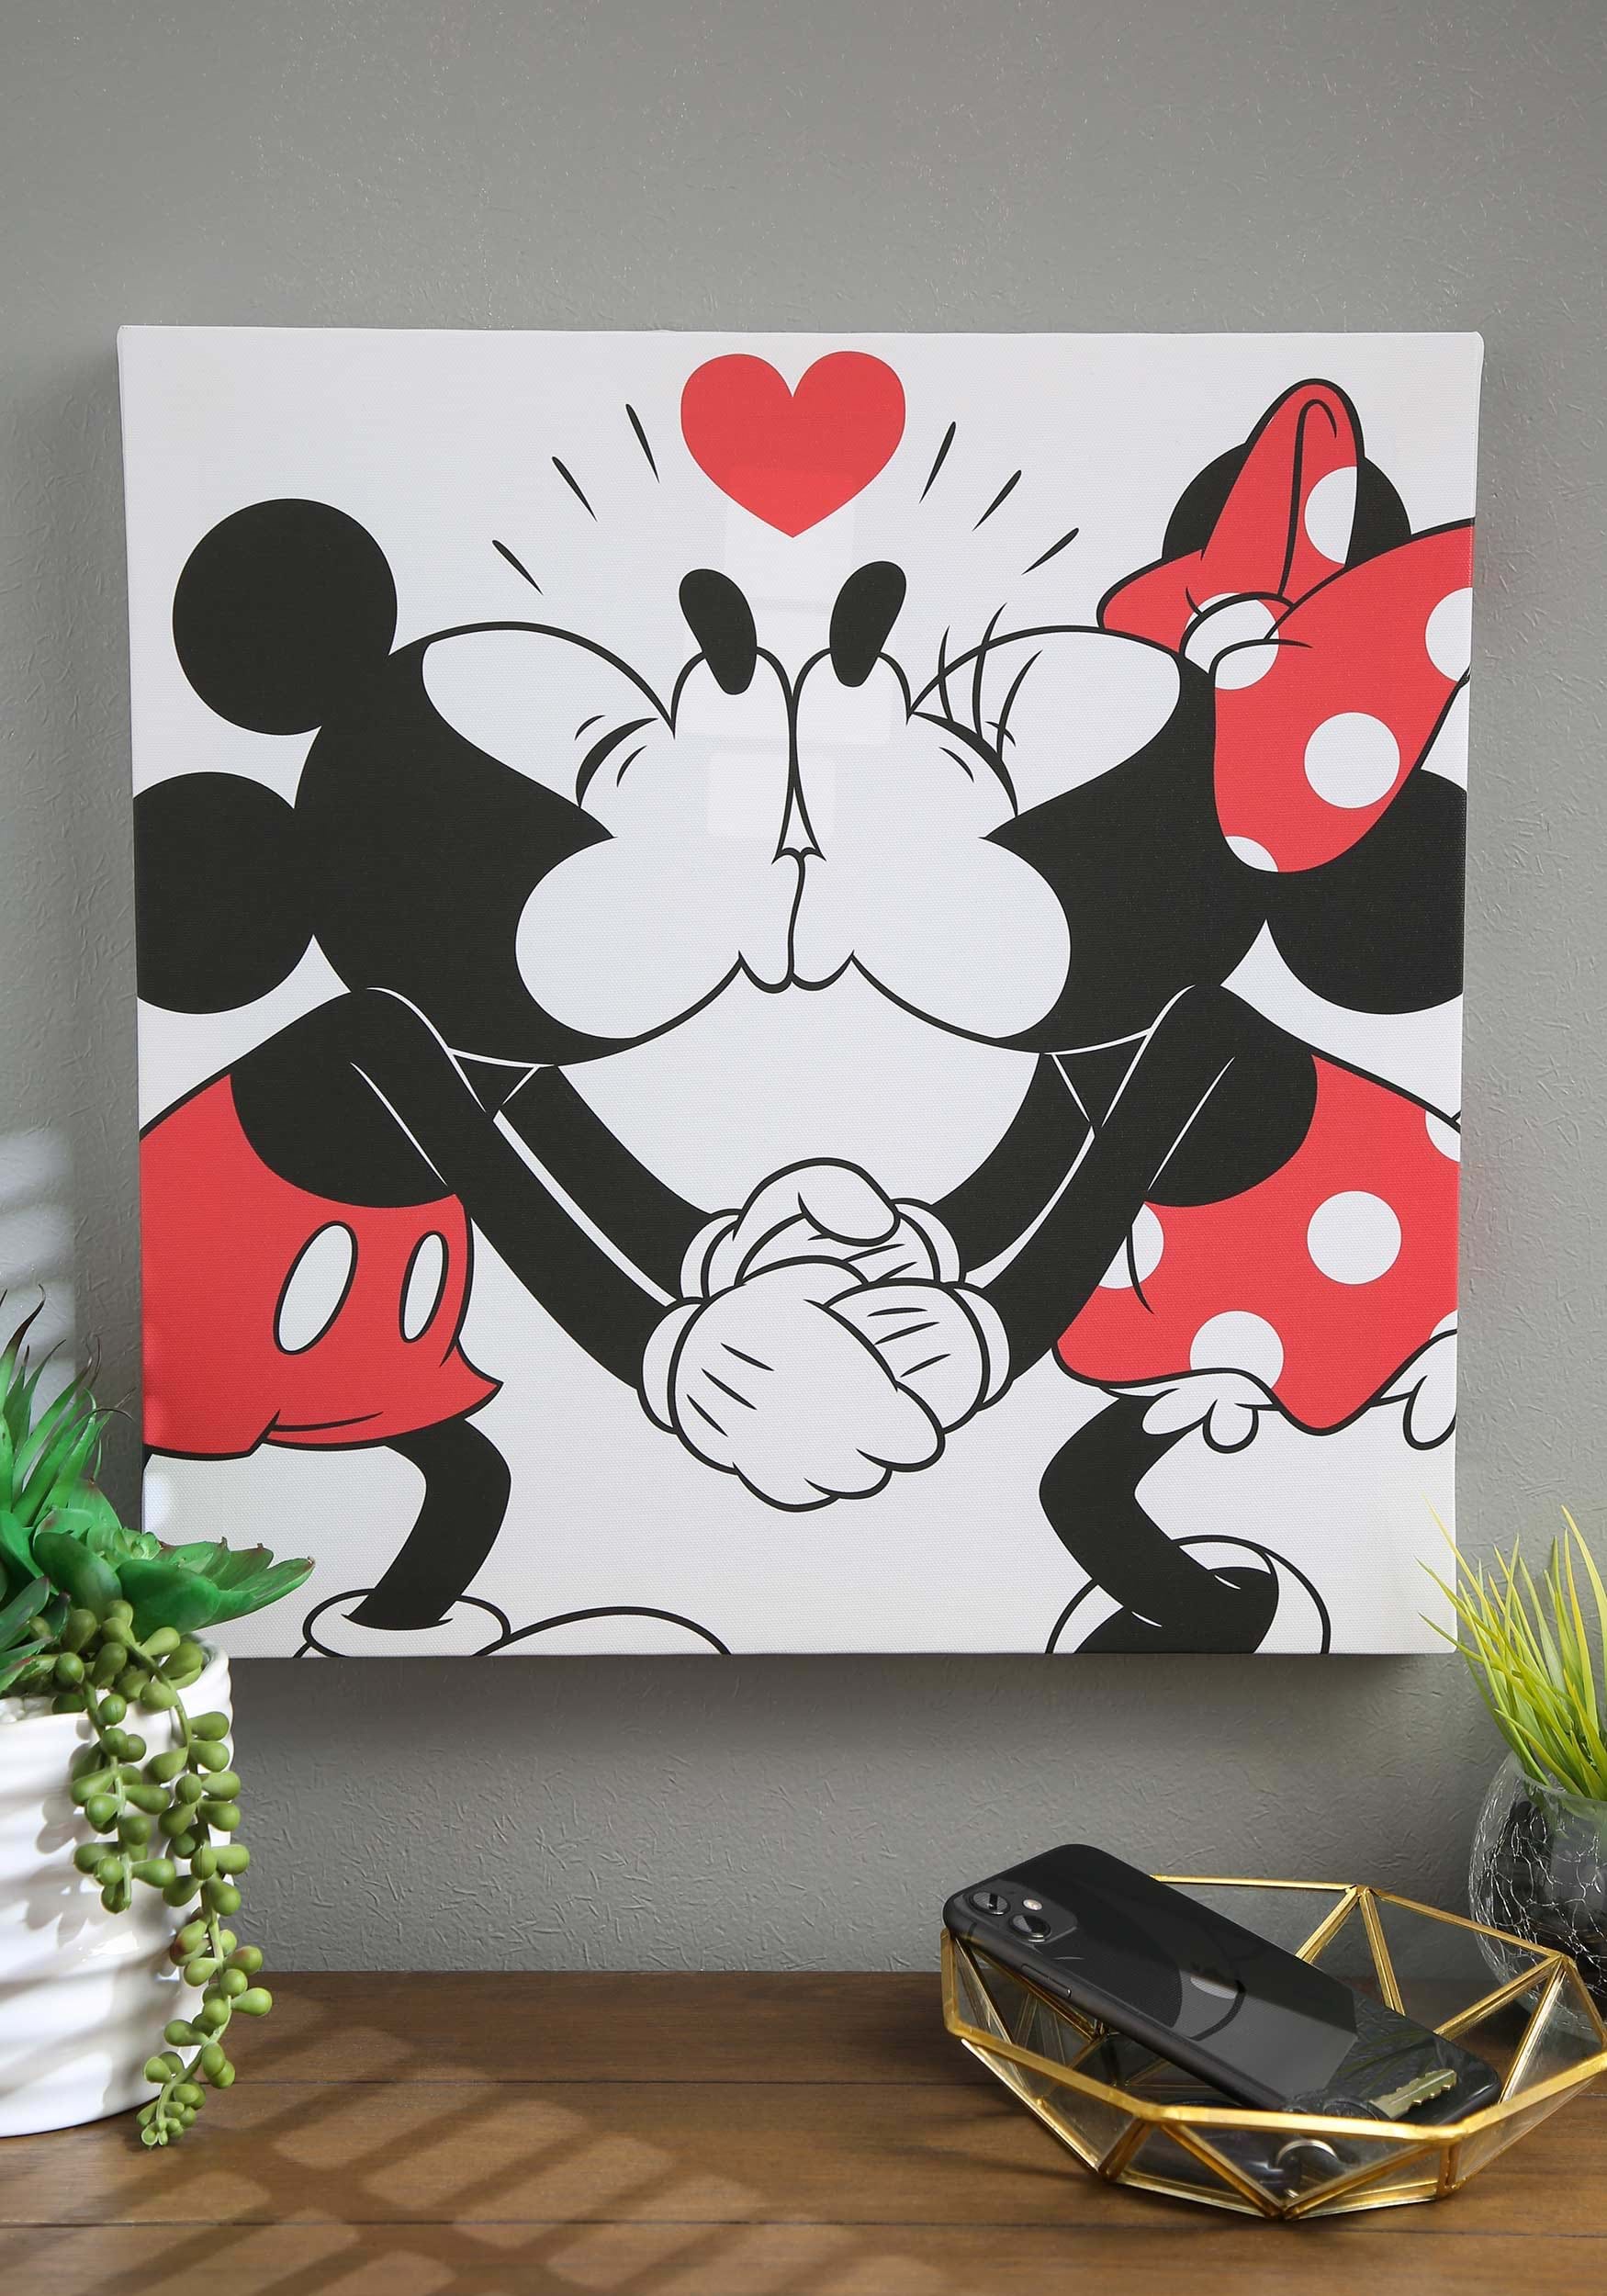 https://images.fun.com/products/73977/1-1/mickey-and-minnie-kiss-canvas-wall-decor.jpg